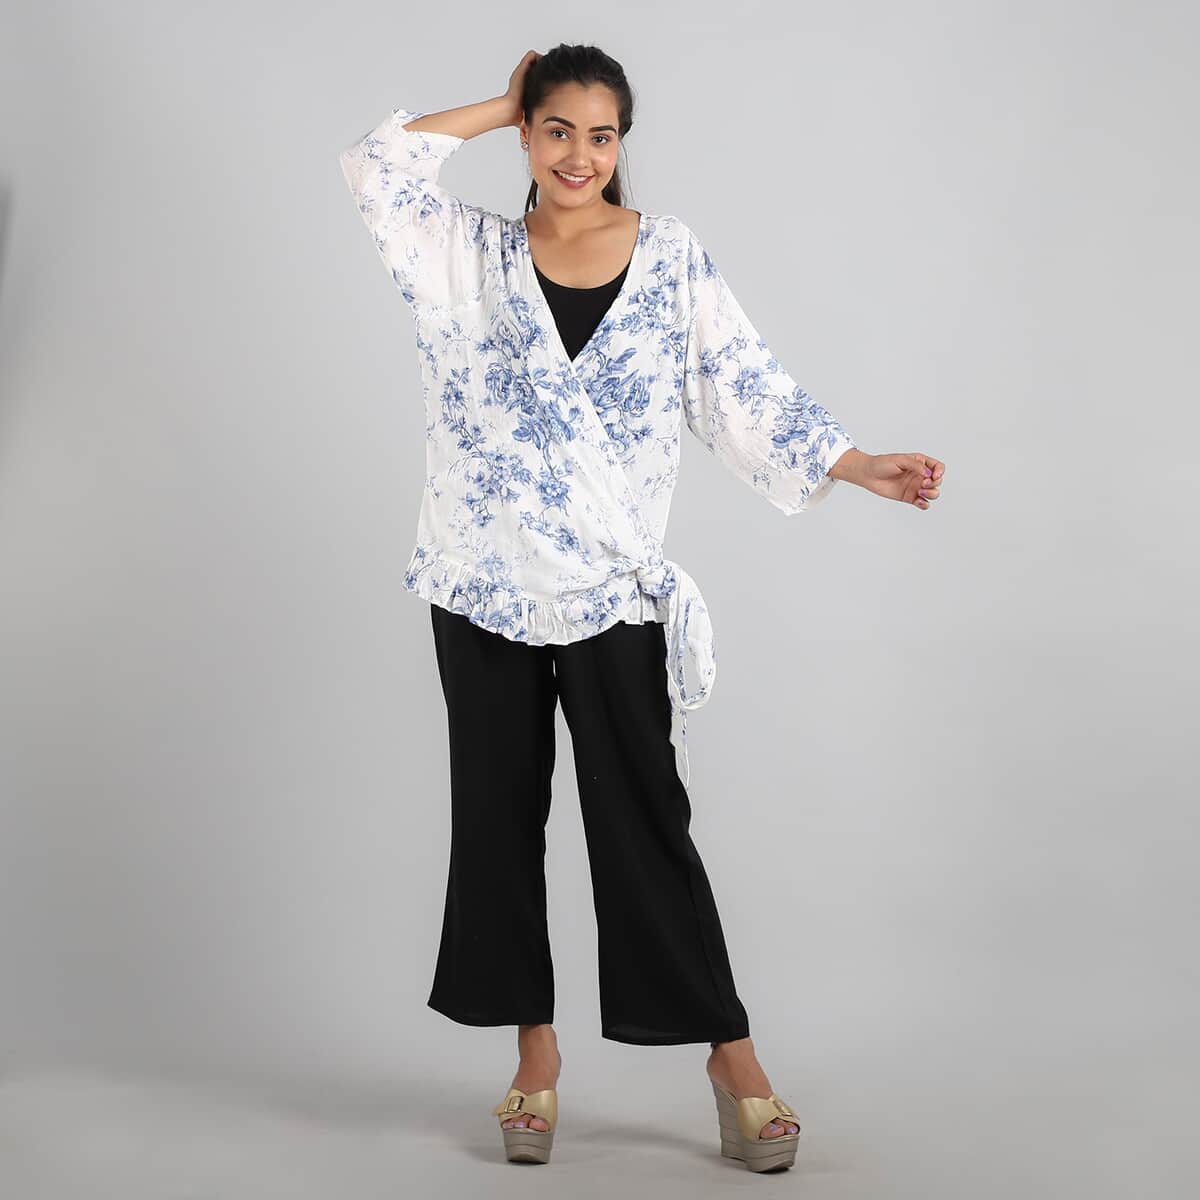 JOVIE Blue Floral Cotton Gauze Wrap Blouse with Frill Trim - One Size Missy (26.25"x23.5") image number 1